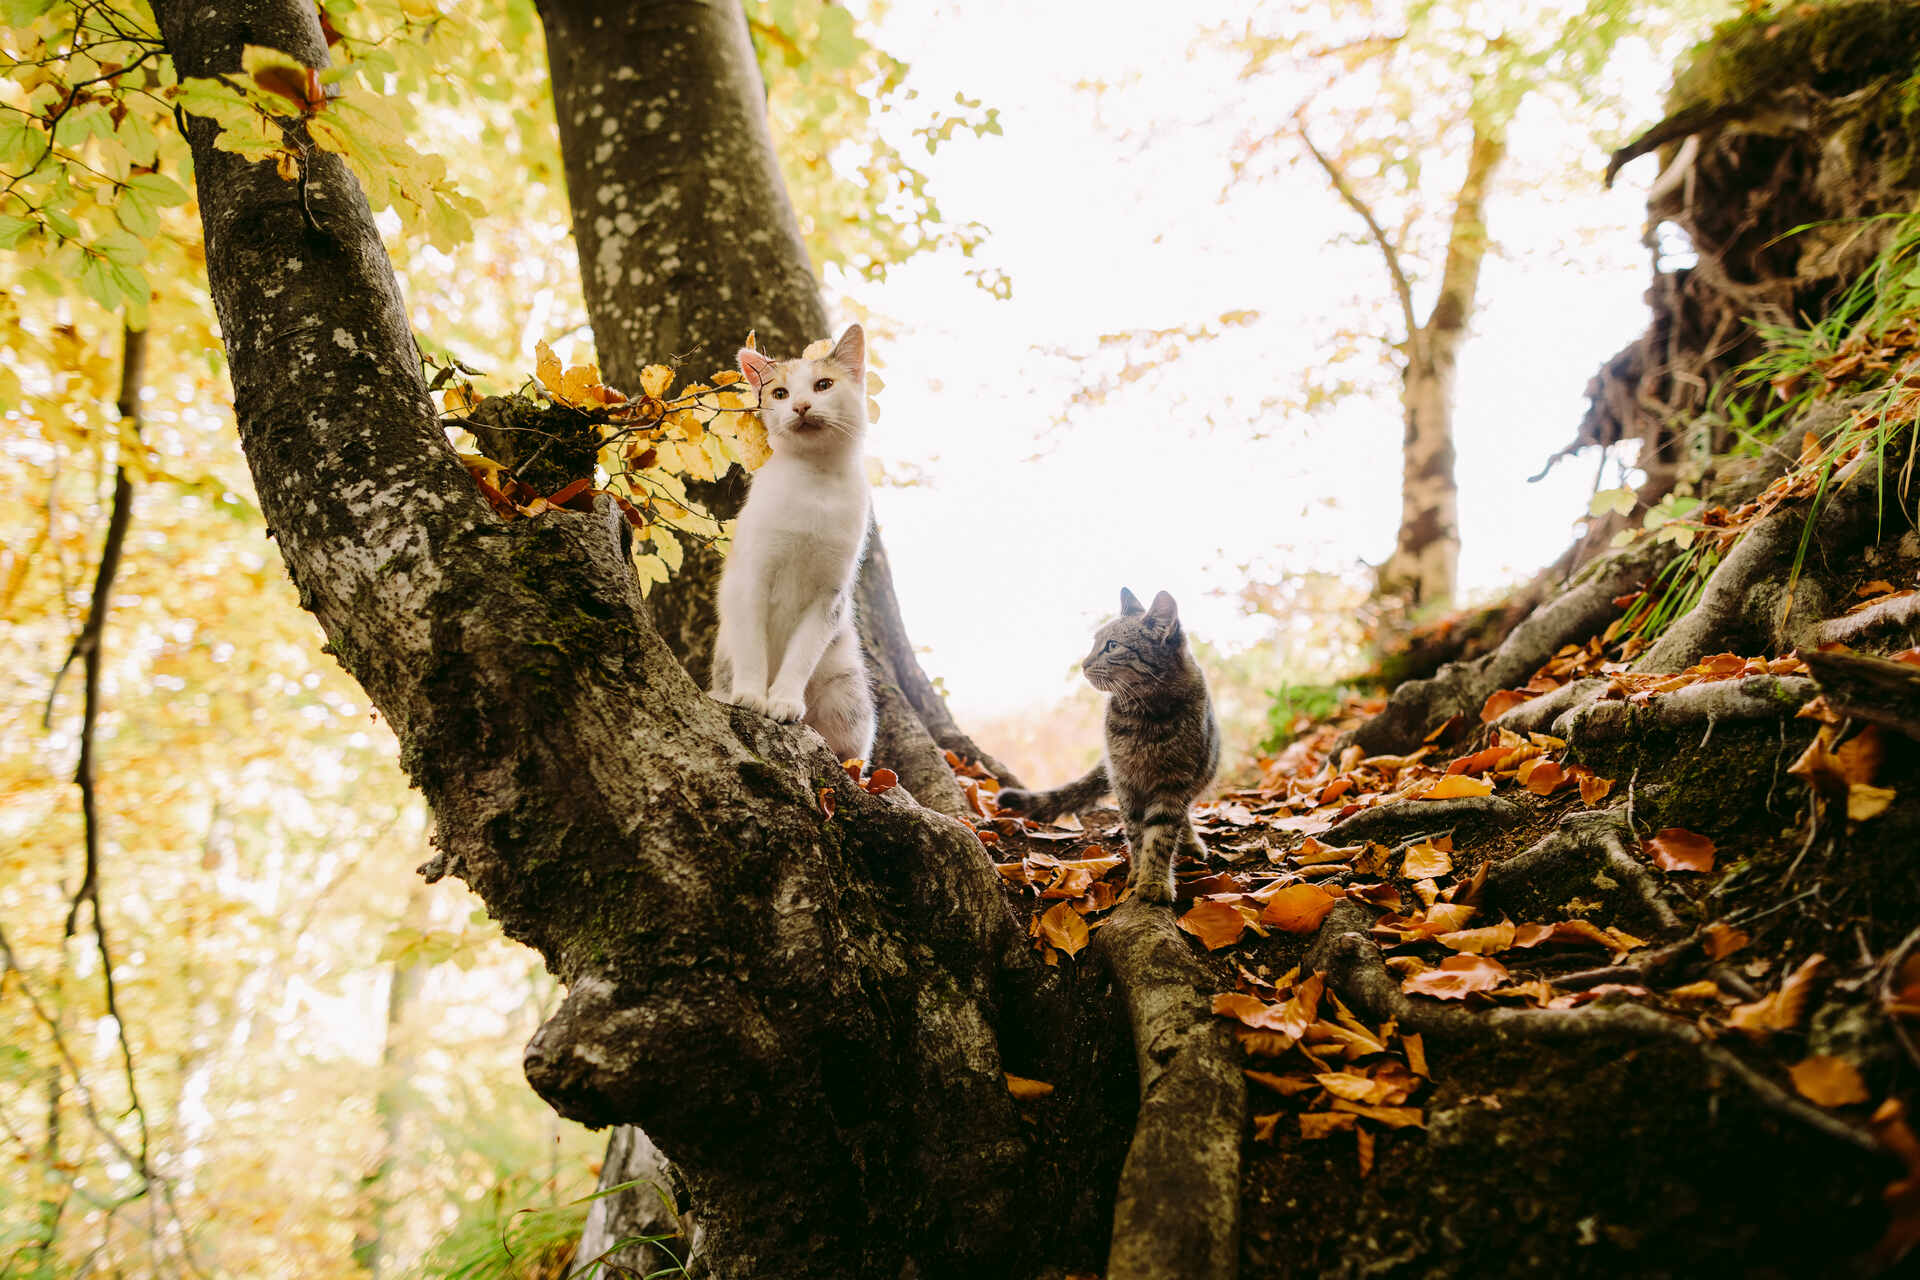 Two outdoor cats exploring a forest